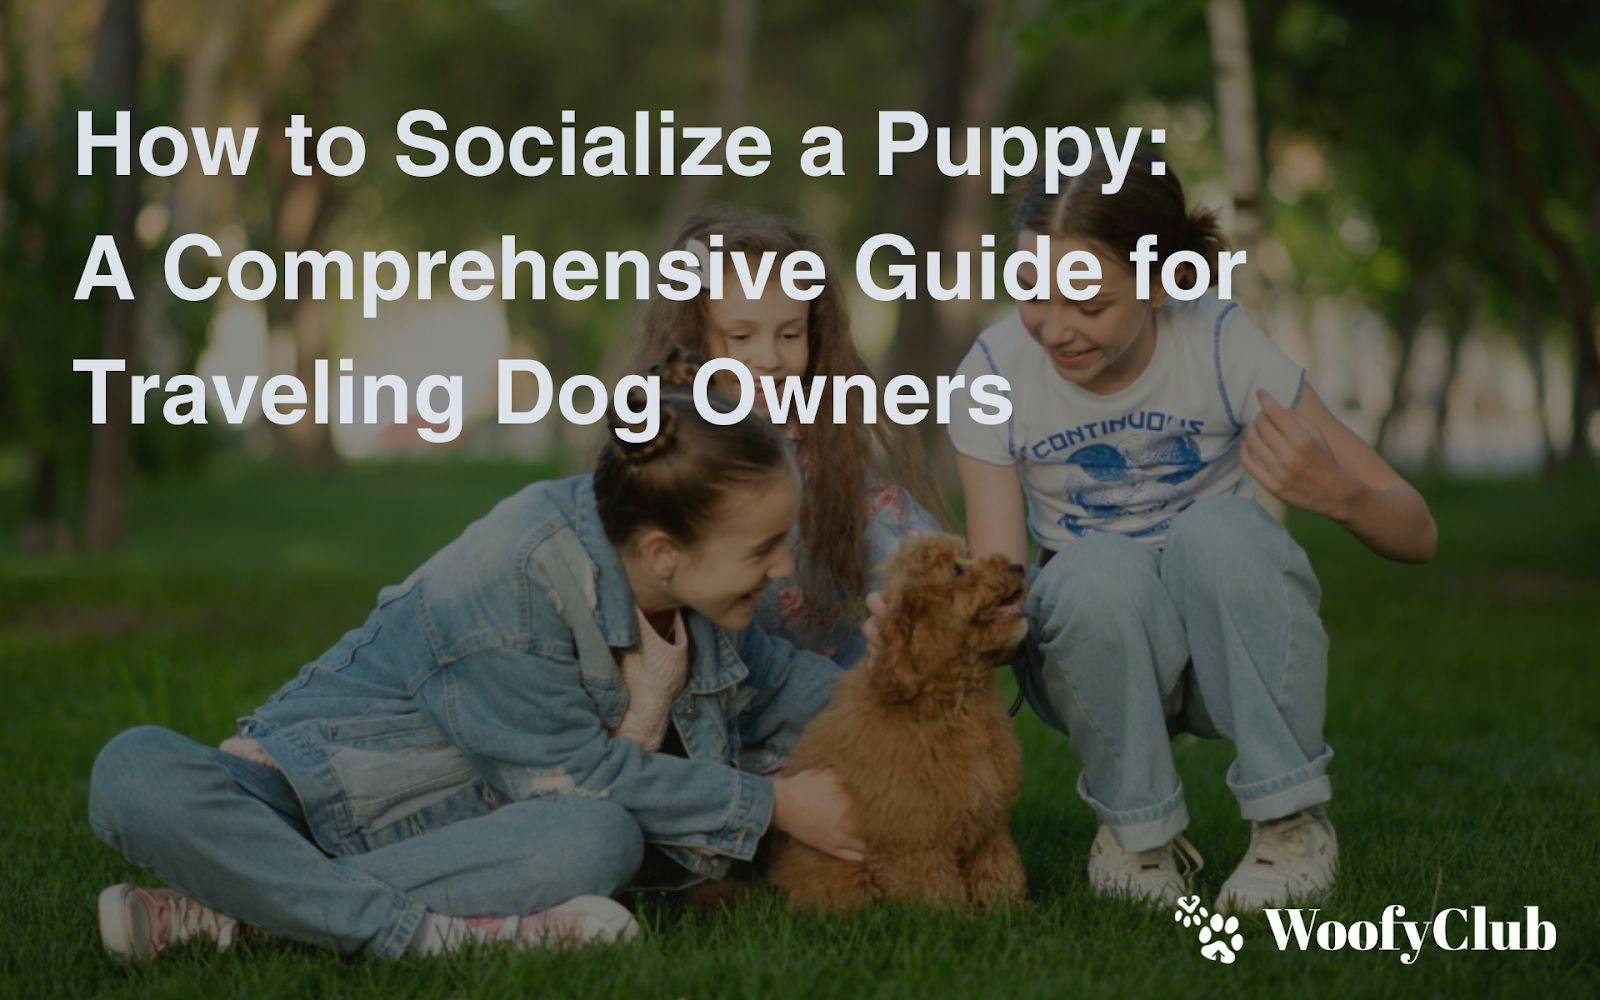 How To Socialize A Puppy: A Comprehensive Guide For Traveling Dog Owners